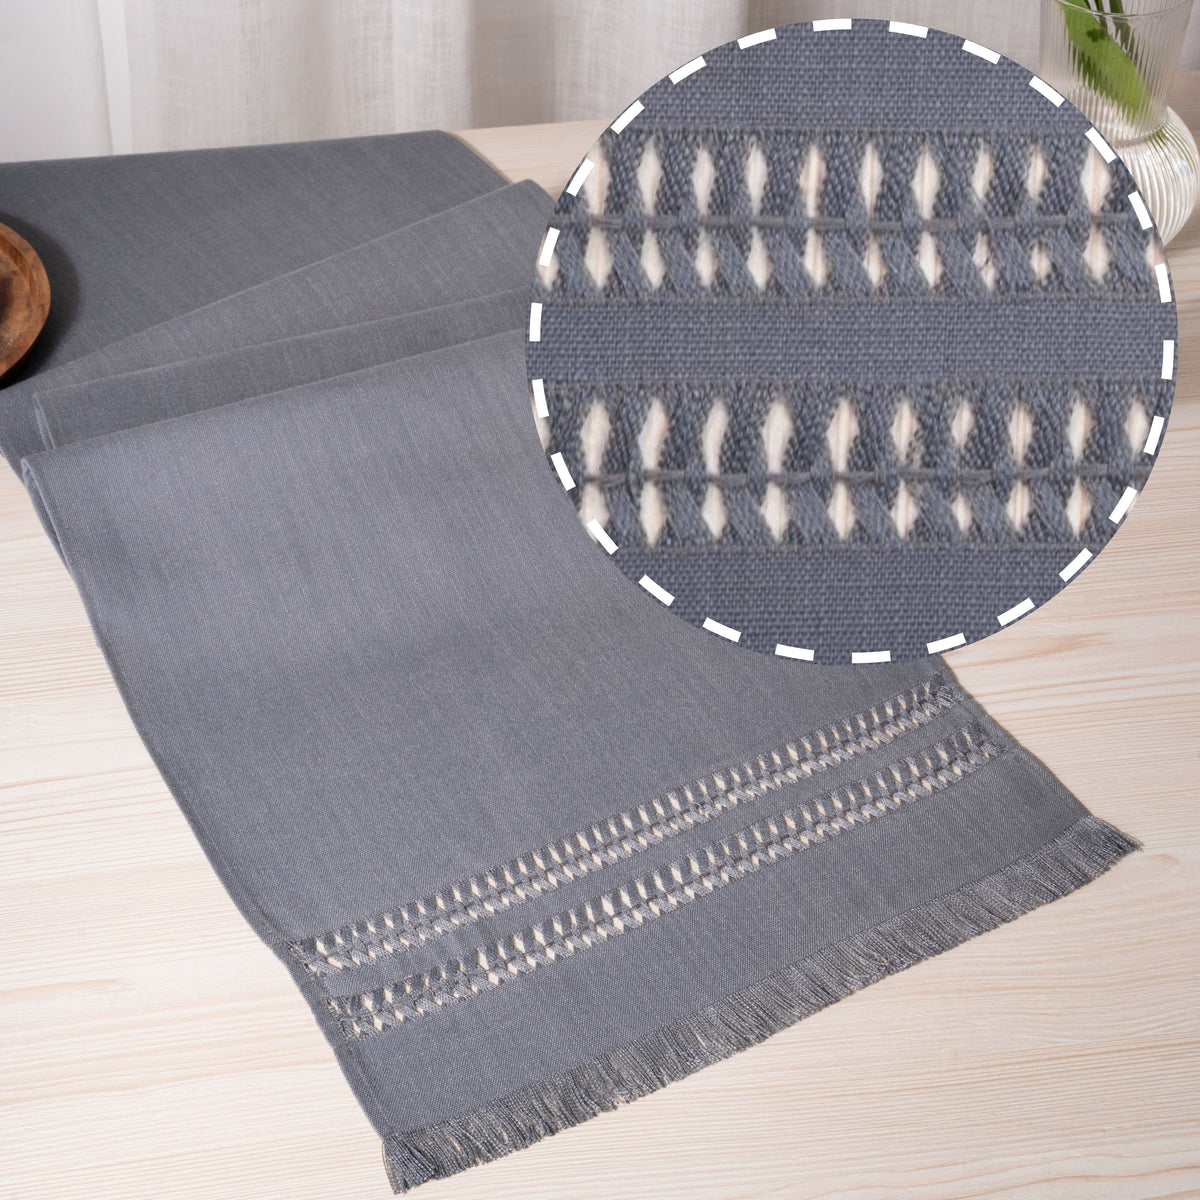 Charcoal Grey Faux Linen Table Runner - Hand Hemstitch